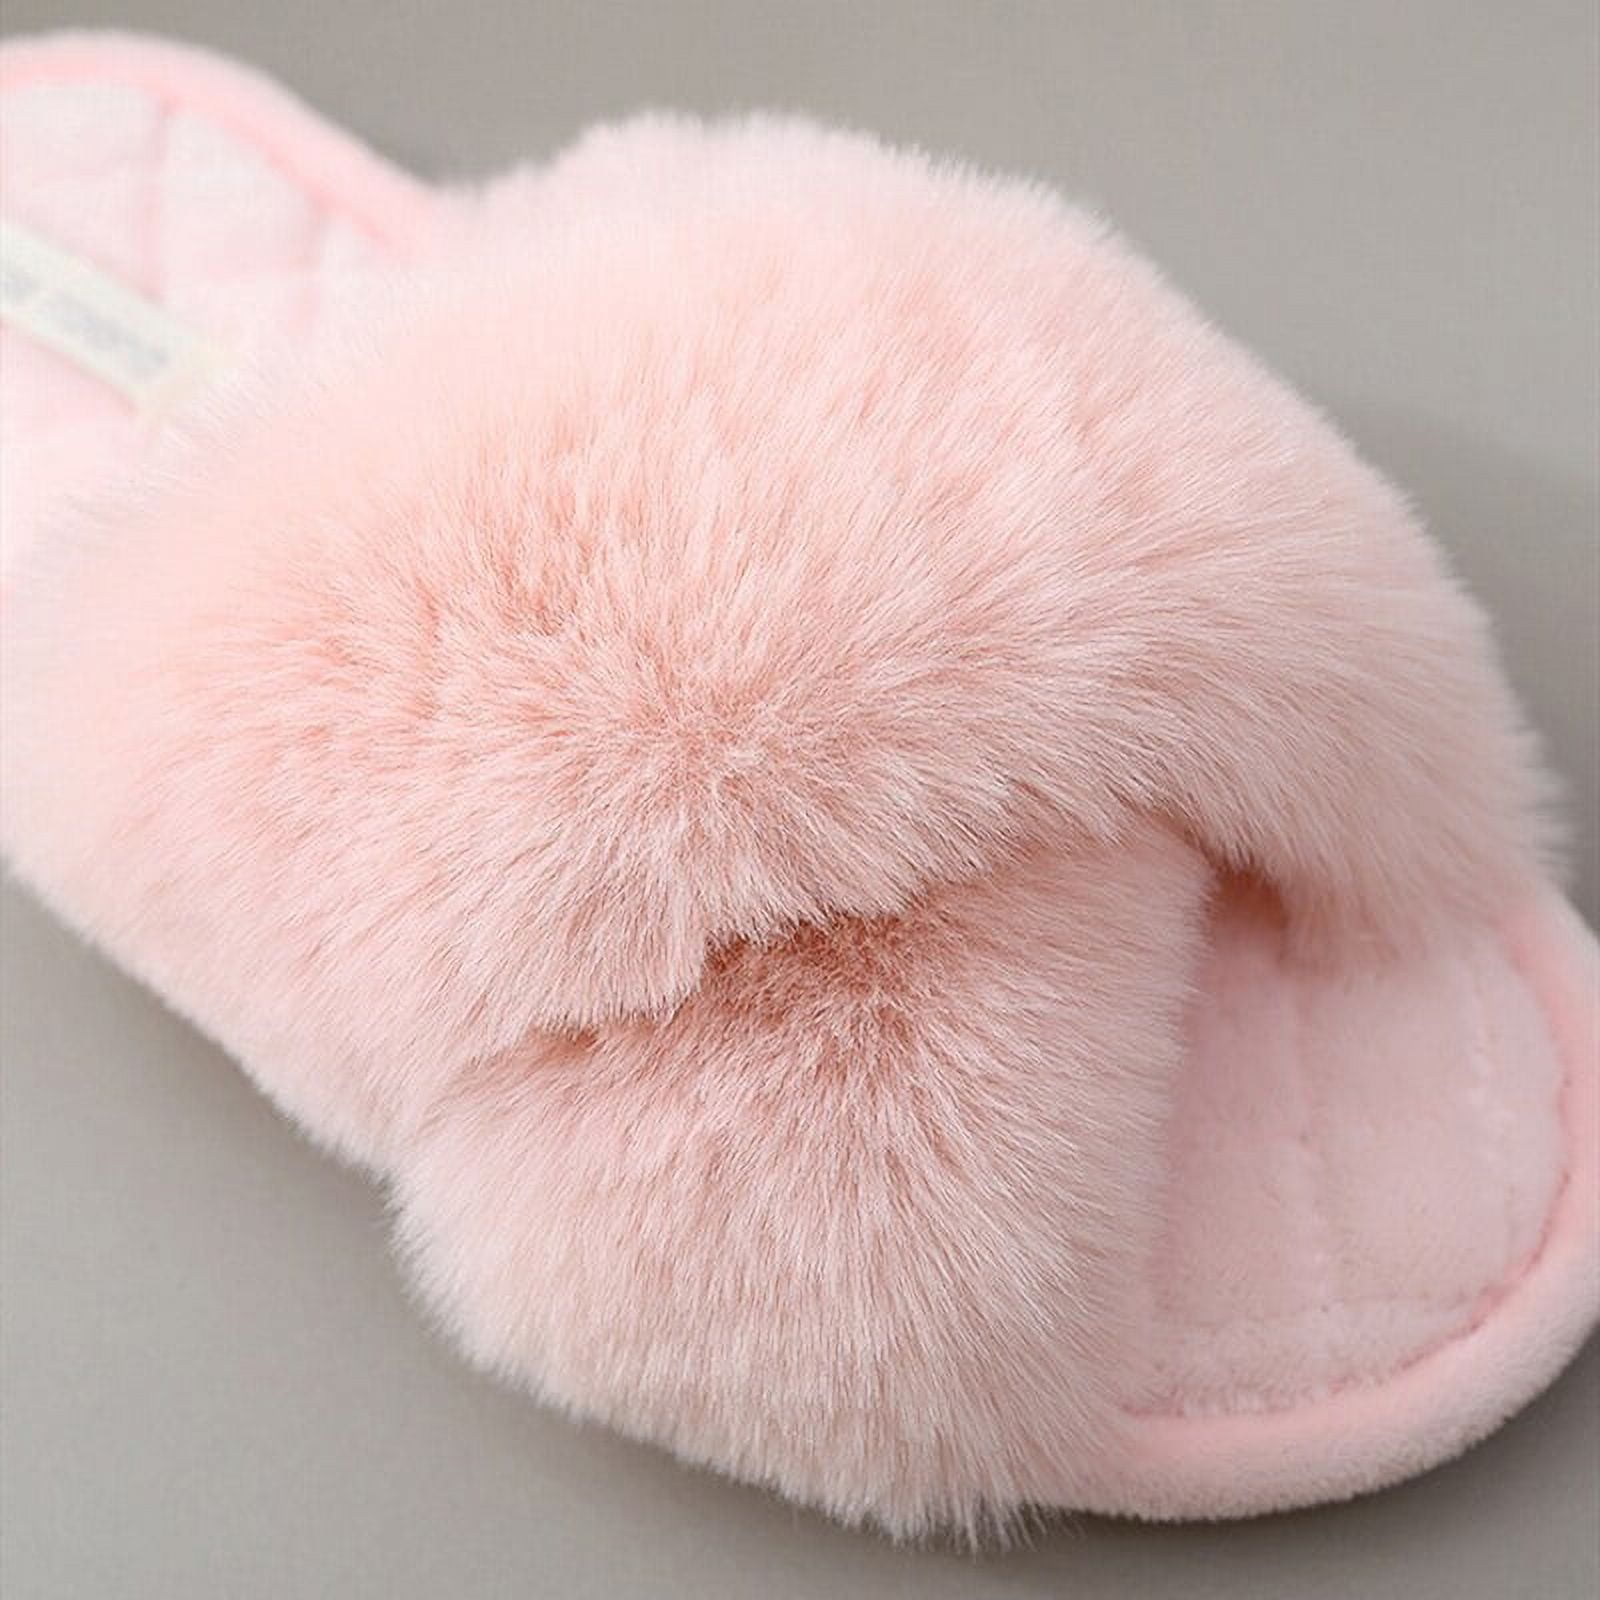 36 Pairs Womens Cozy House Slippers For Women For Indoor And Outdoor Fuzzy  Slippers With Double Band In Assorted Color - Women's Slippers